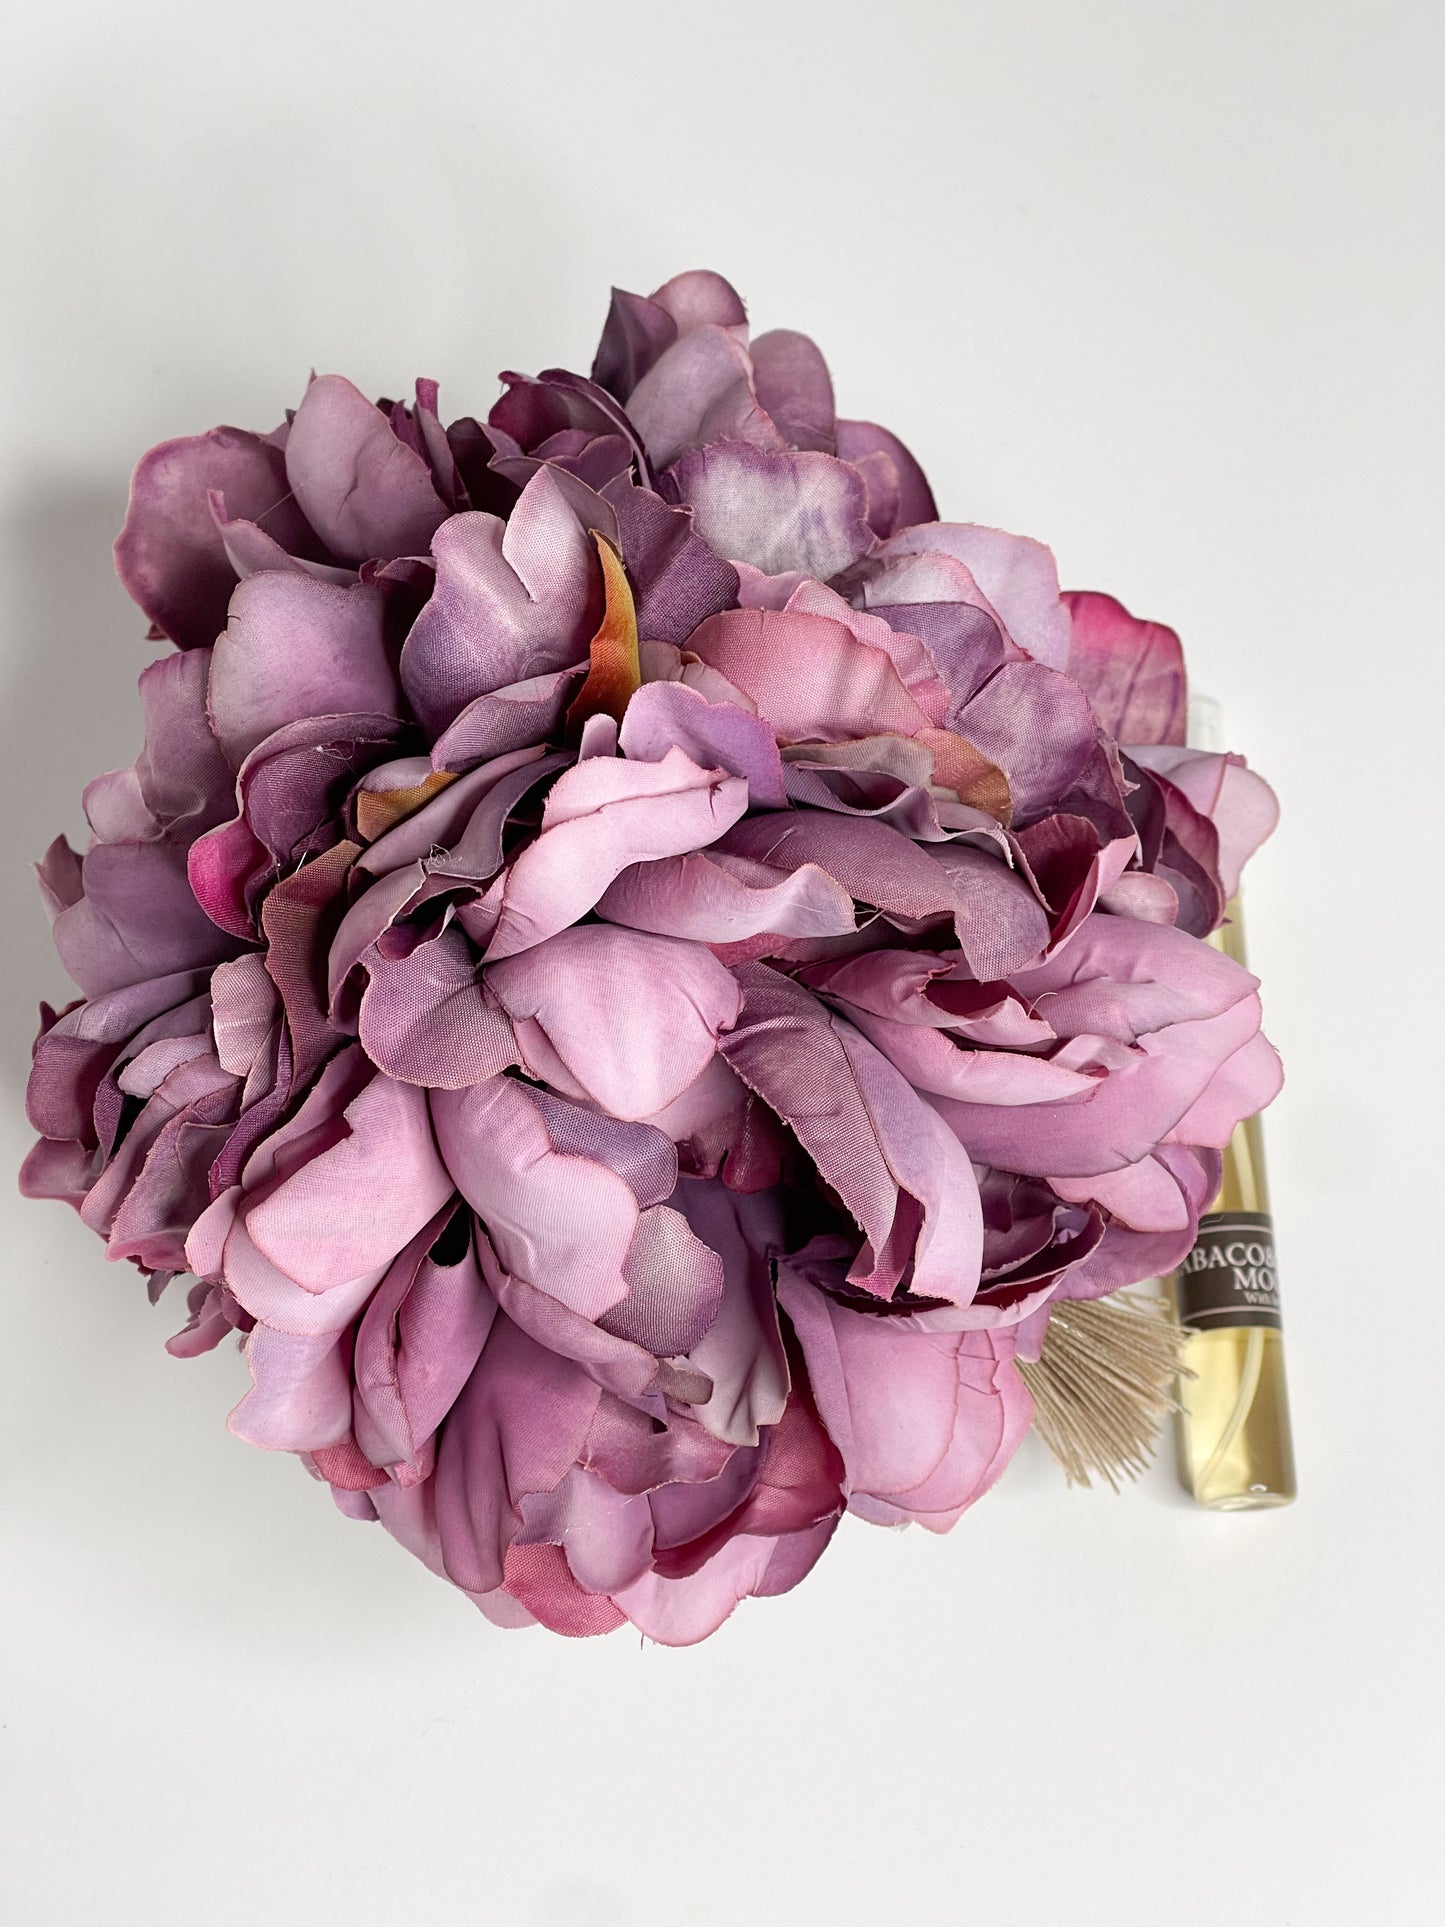 Home fragrance "Almond Peonies"